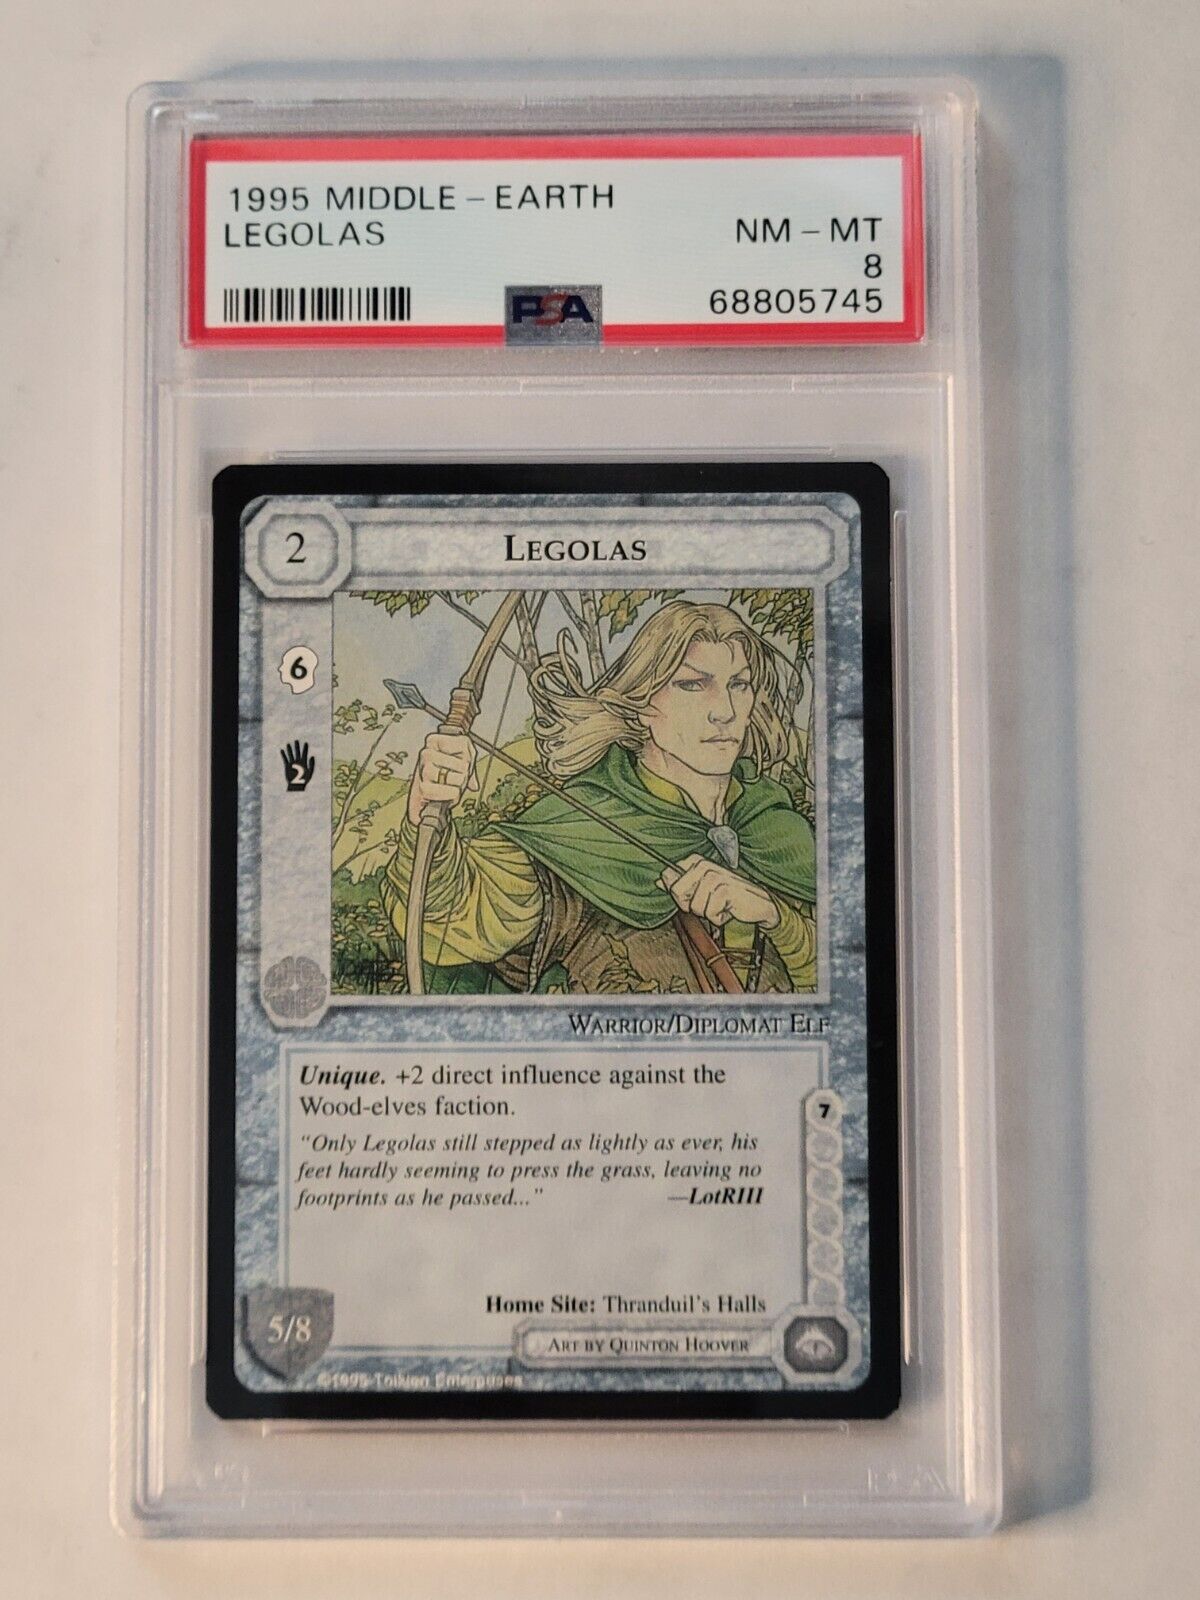 1995 Middle Earth Wizards Limited 1st edition LOTR TCG CCG  Legolas PSA 8